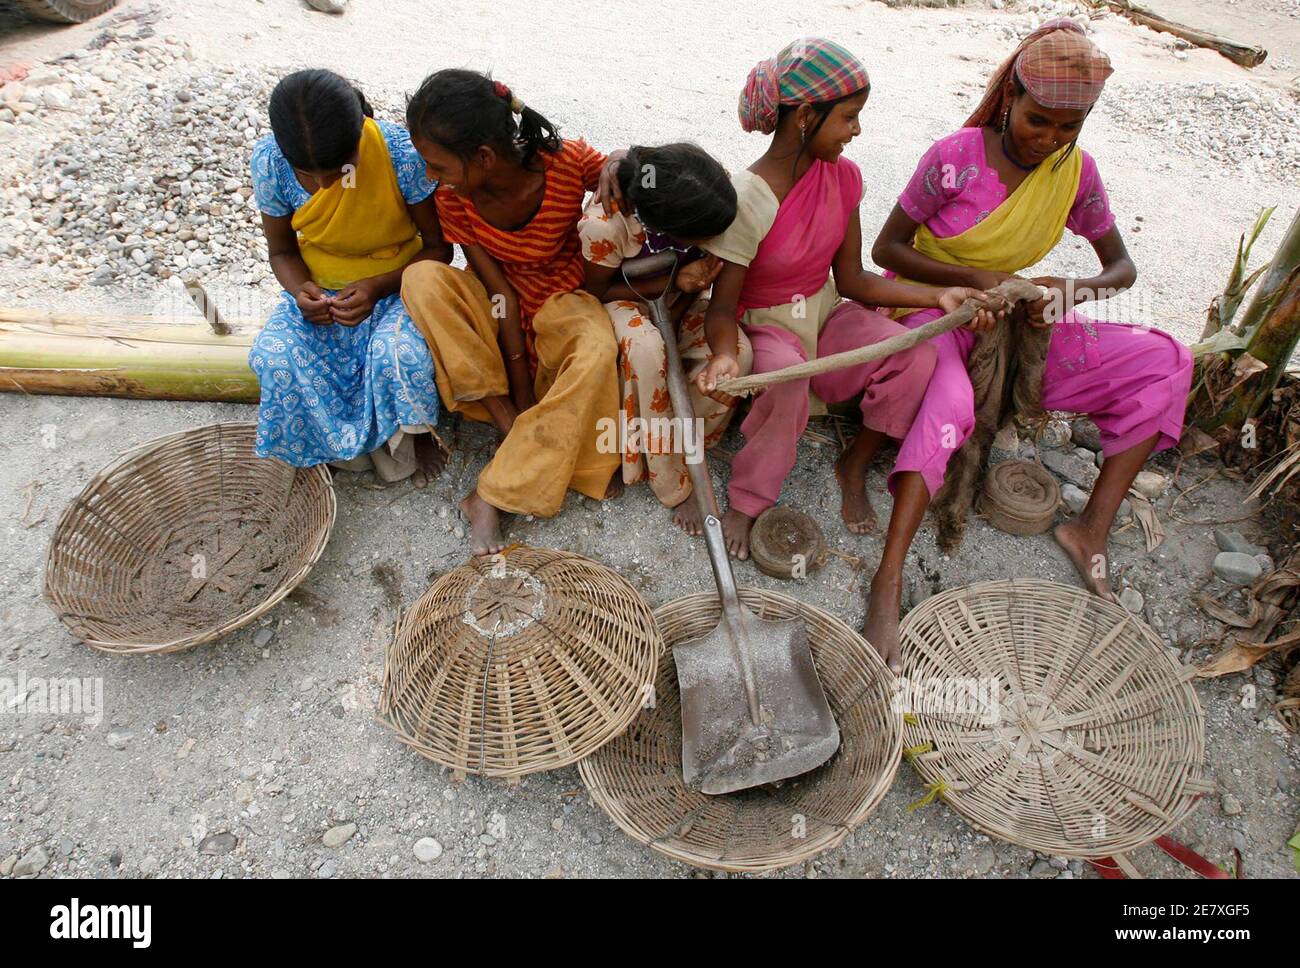 Child Labourers Rest As They Take A Break From Their Work On The Outskirts Of The Eastern Indian City Of Siliguri June 12 09 The International Labour Organization Ilo Celebrates World Day